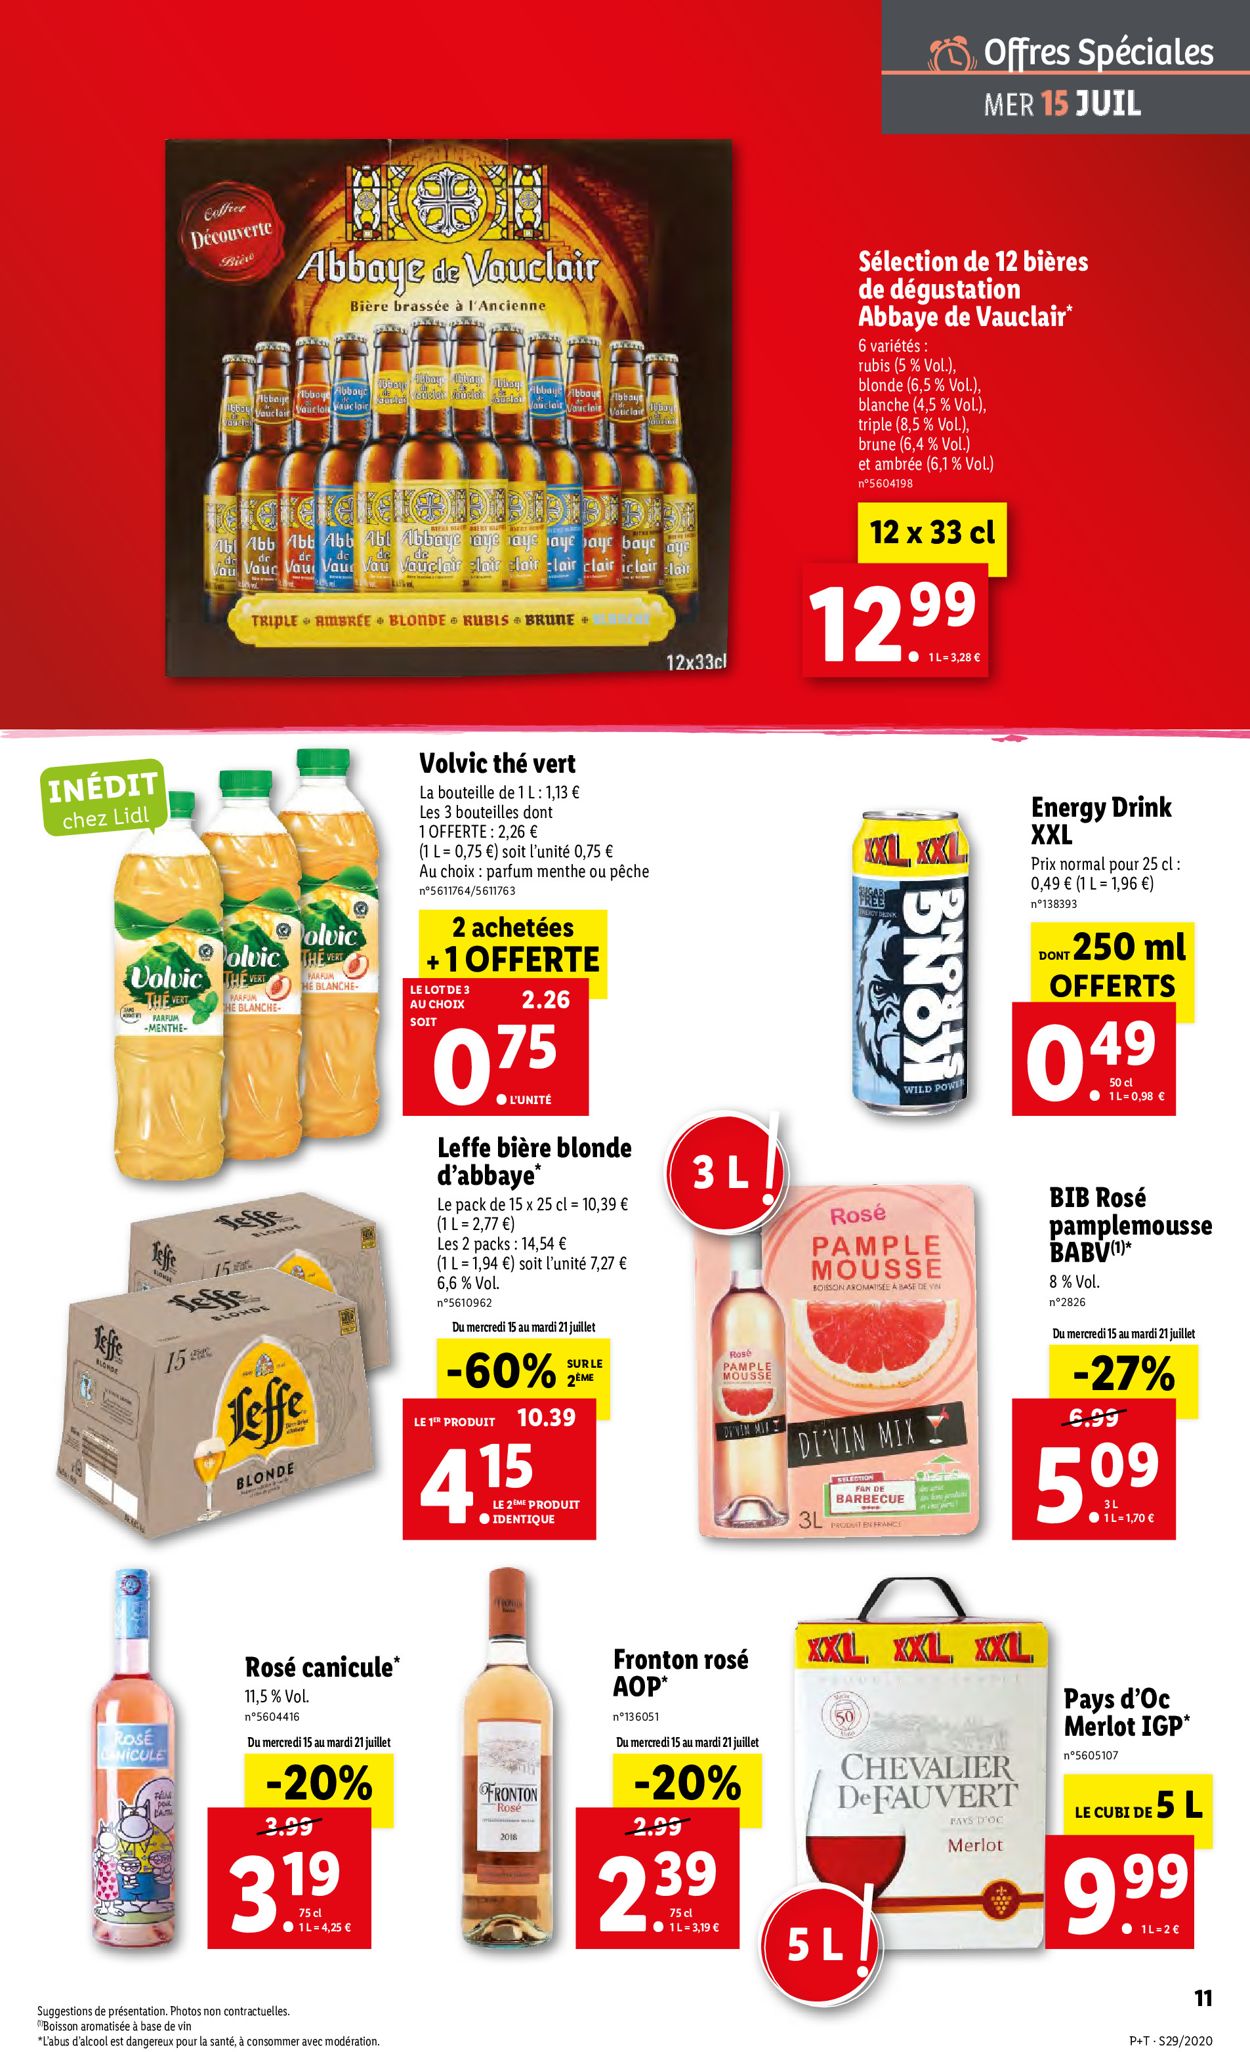 Lidl Catalogue - 15.07-21.07.2020 (Page 11)